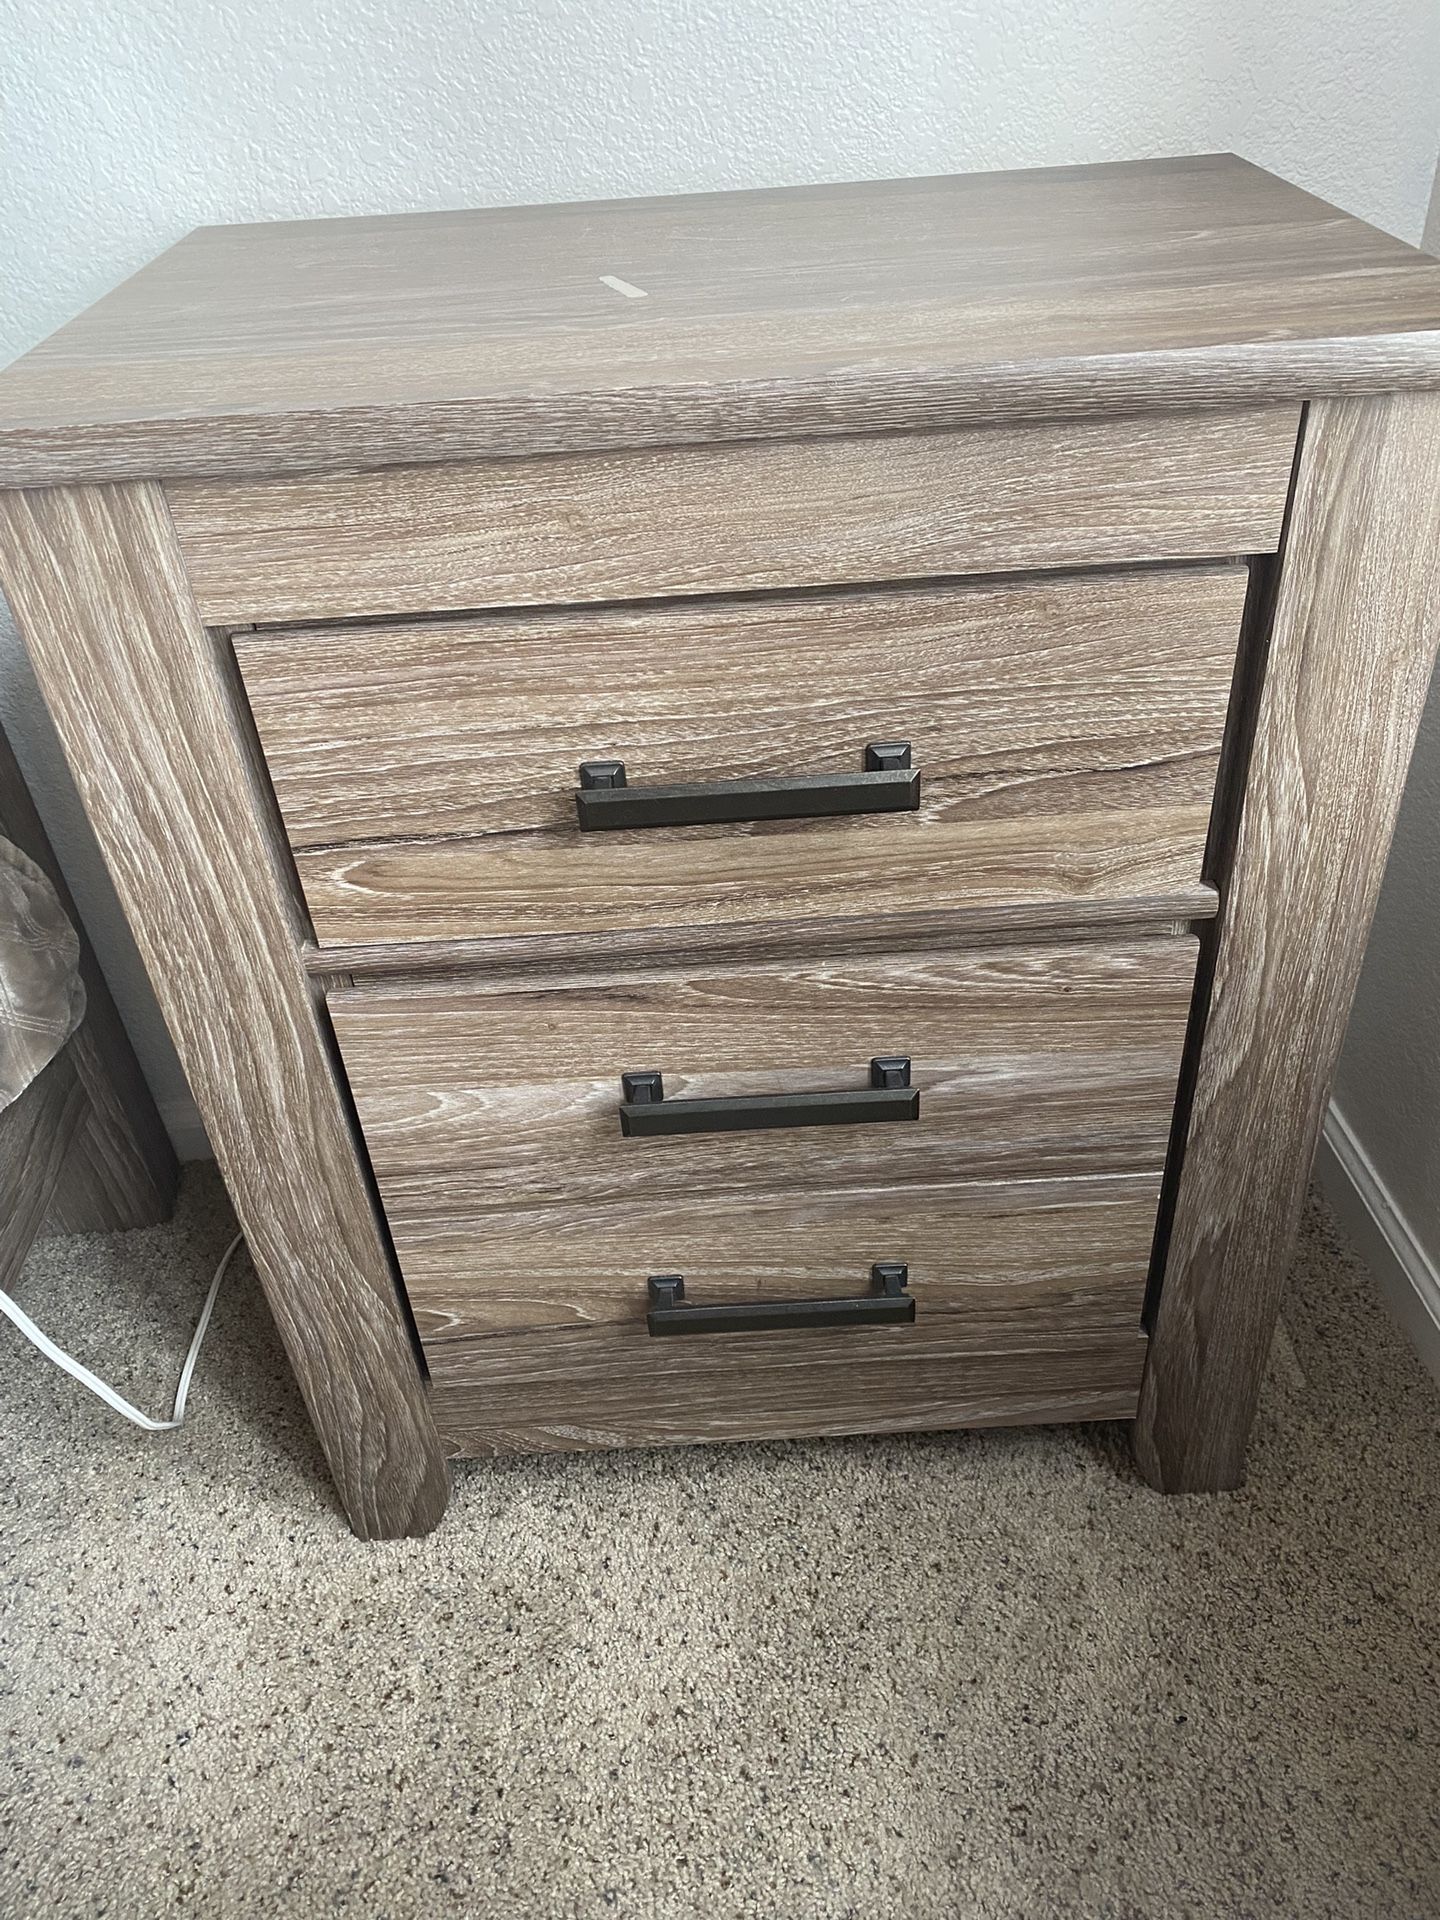 One Nightstand with 2 drawers